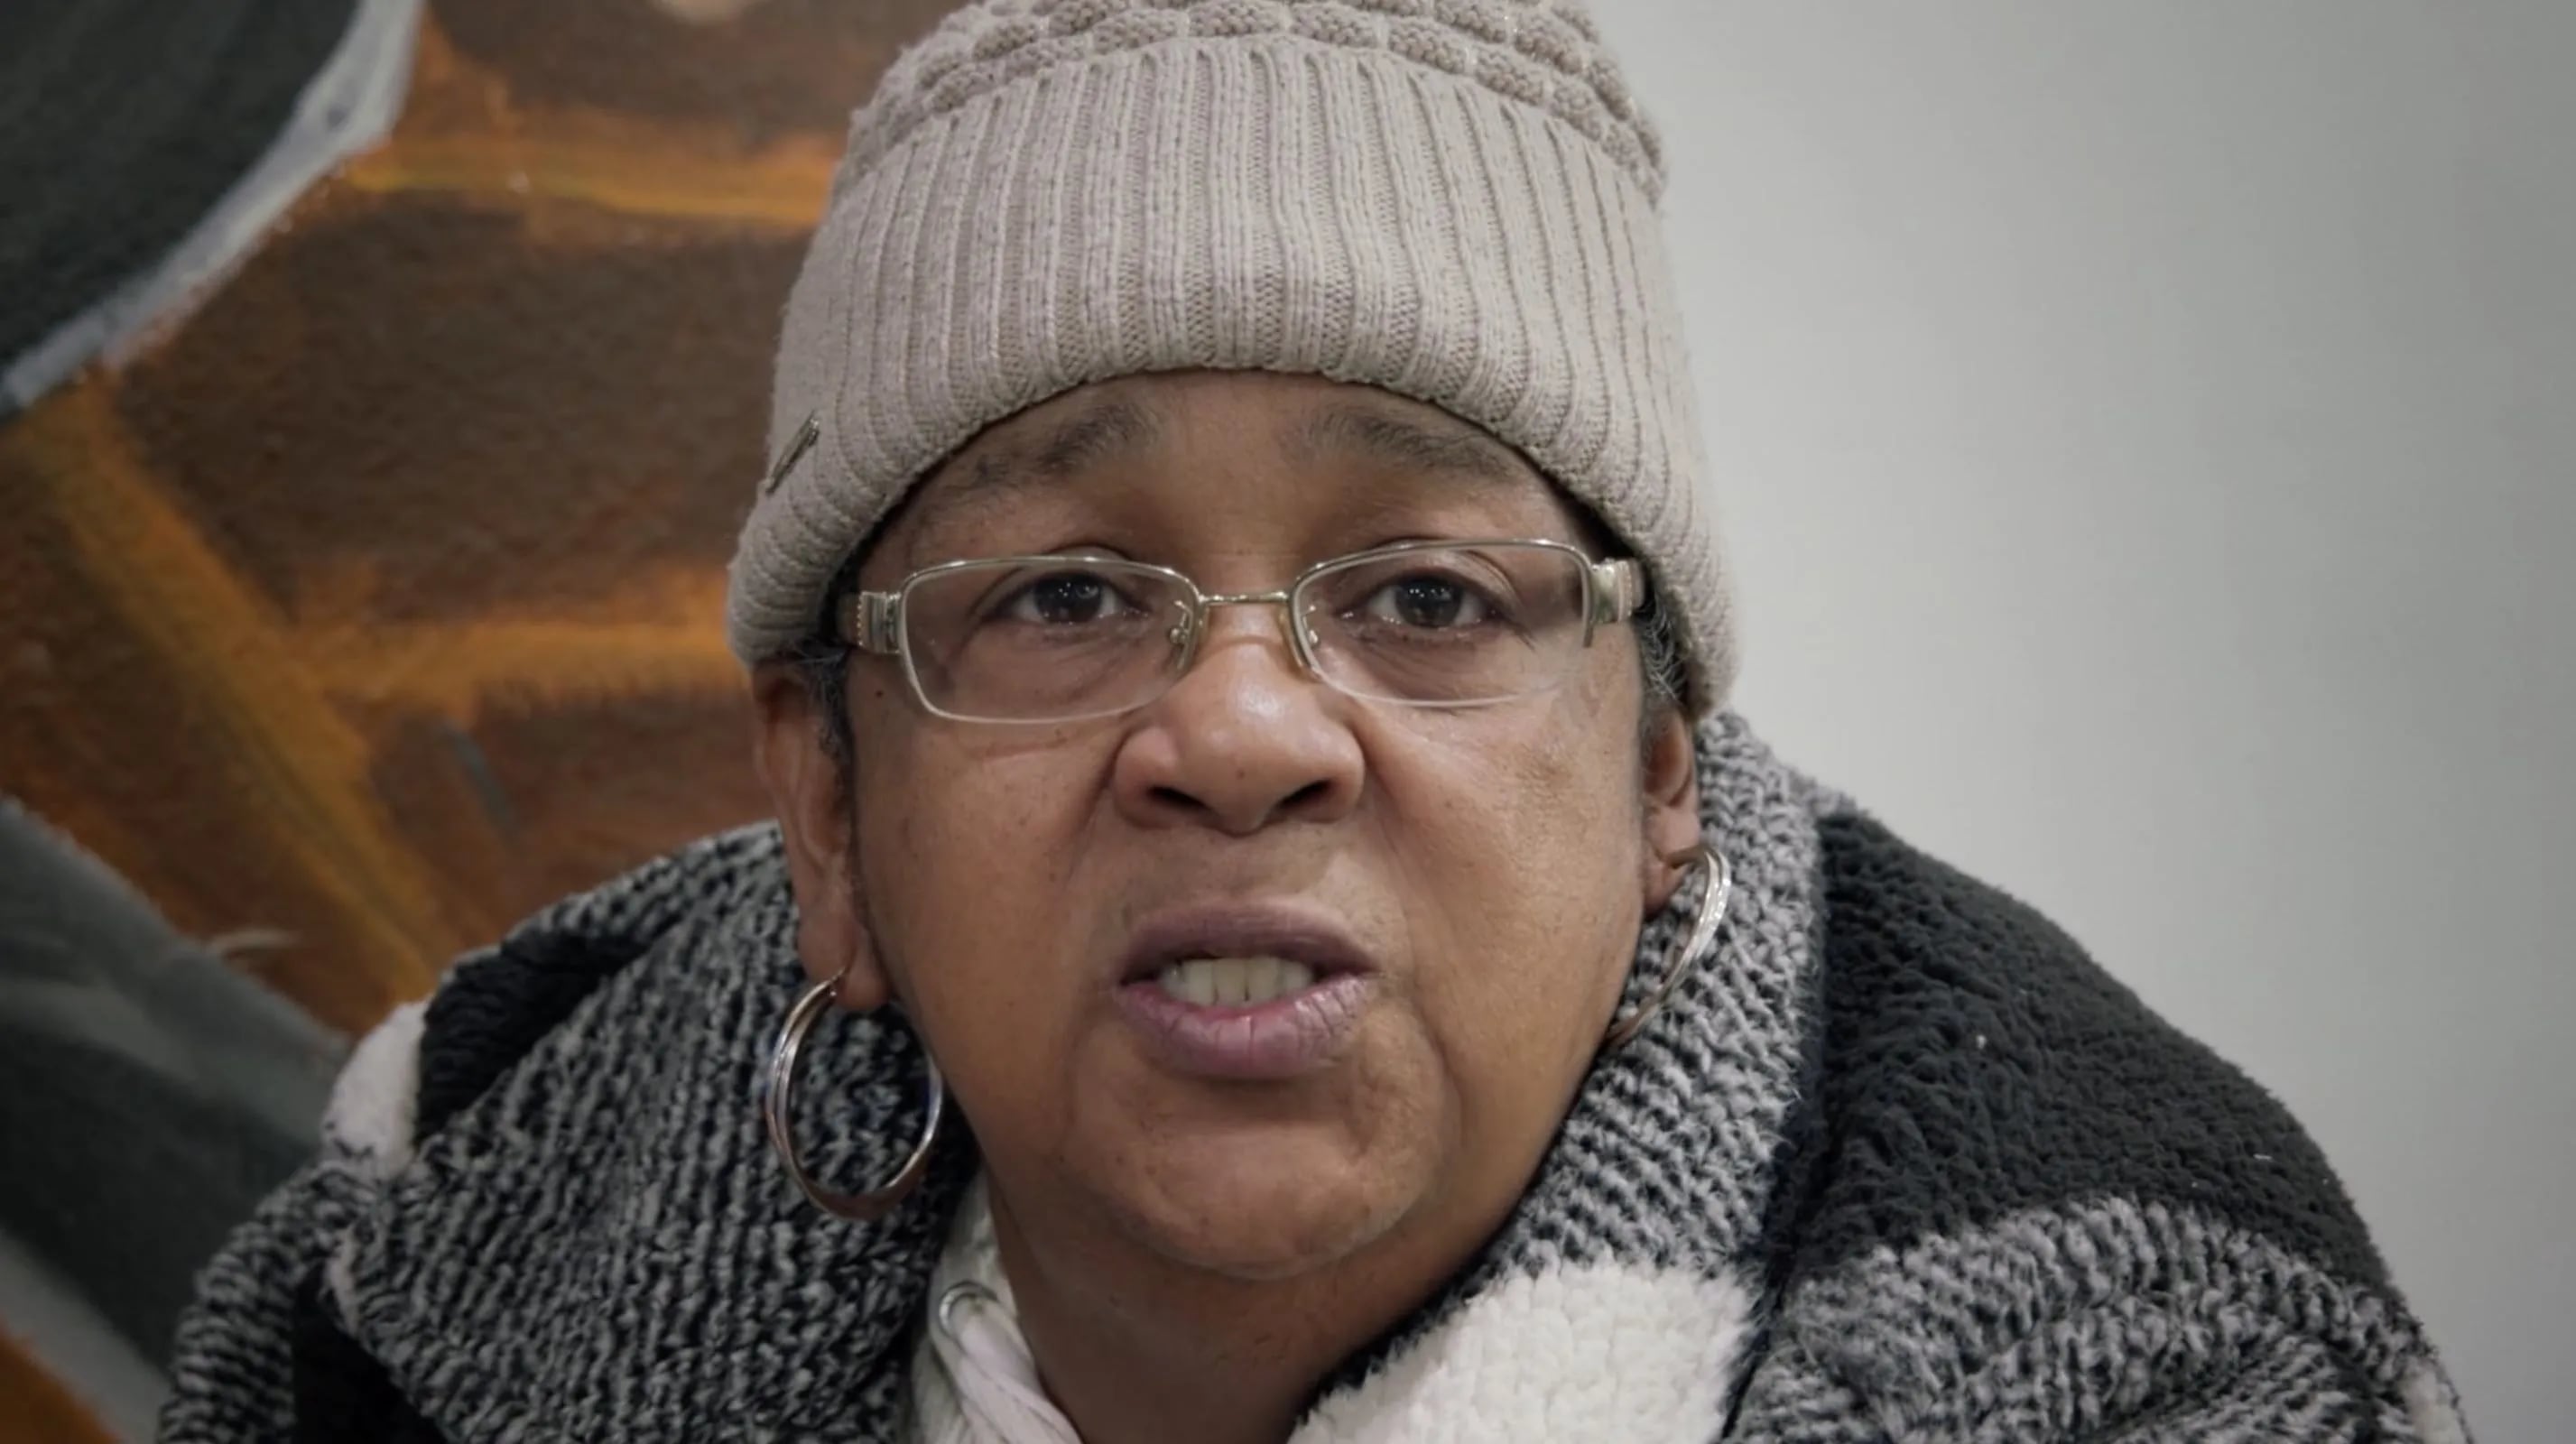 According to filmmaker Bilal Motley, Zulene Mayfield is Chester's leading environmental justice advocate. She has been fighting the city's trash incinerator since the 1990s.